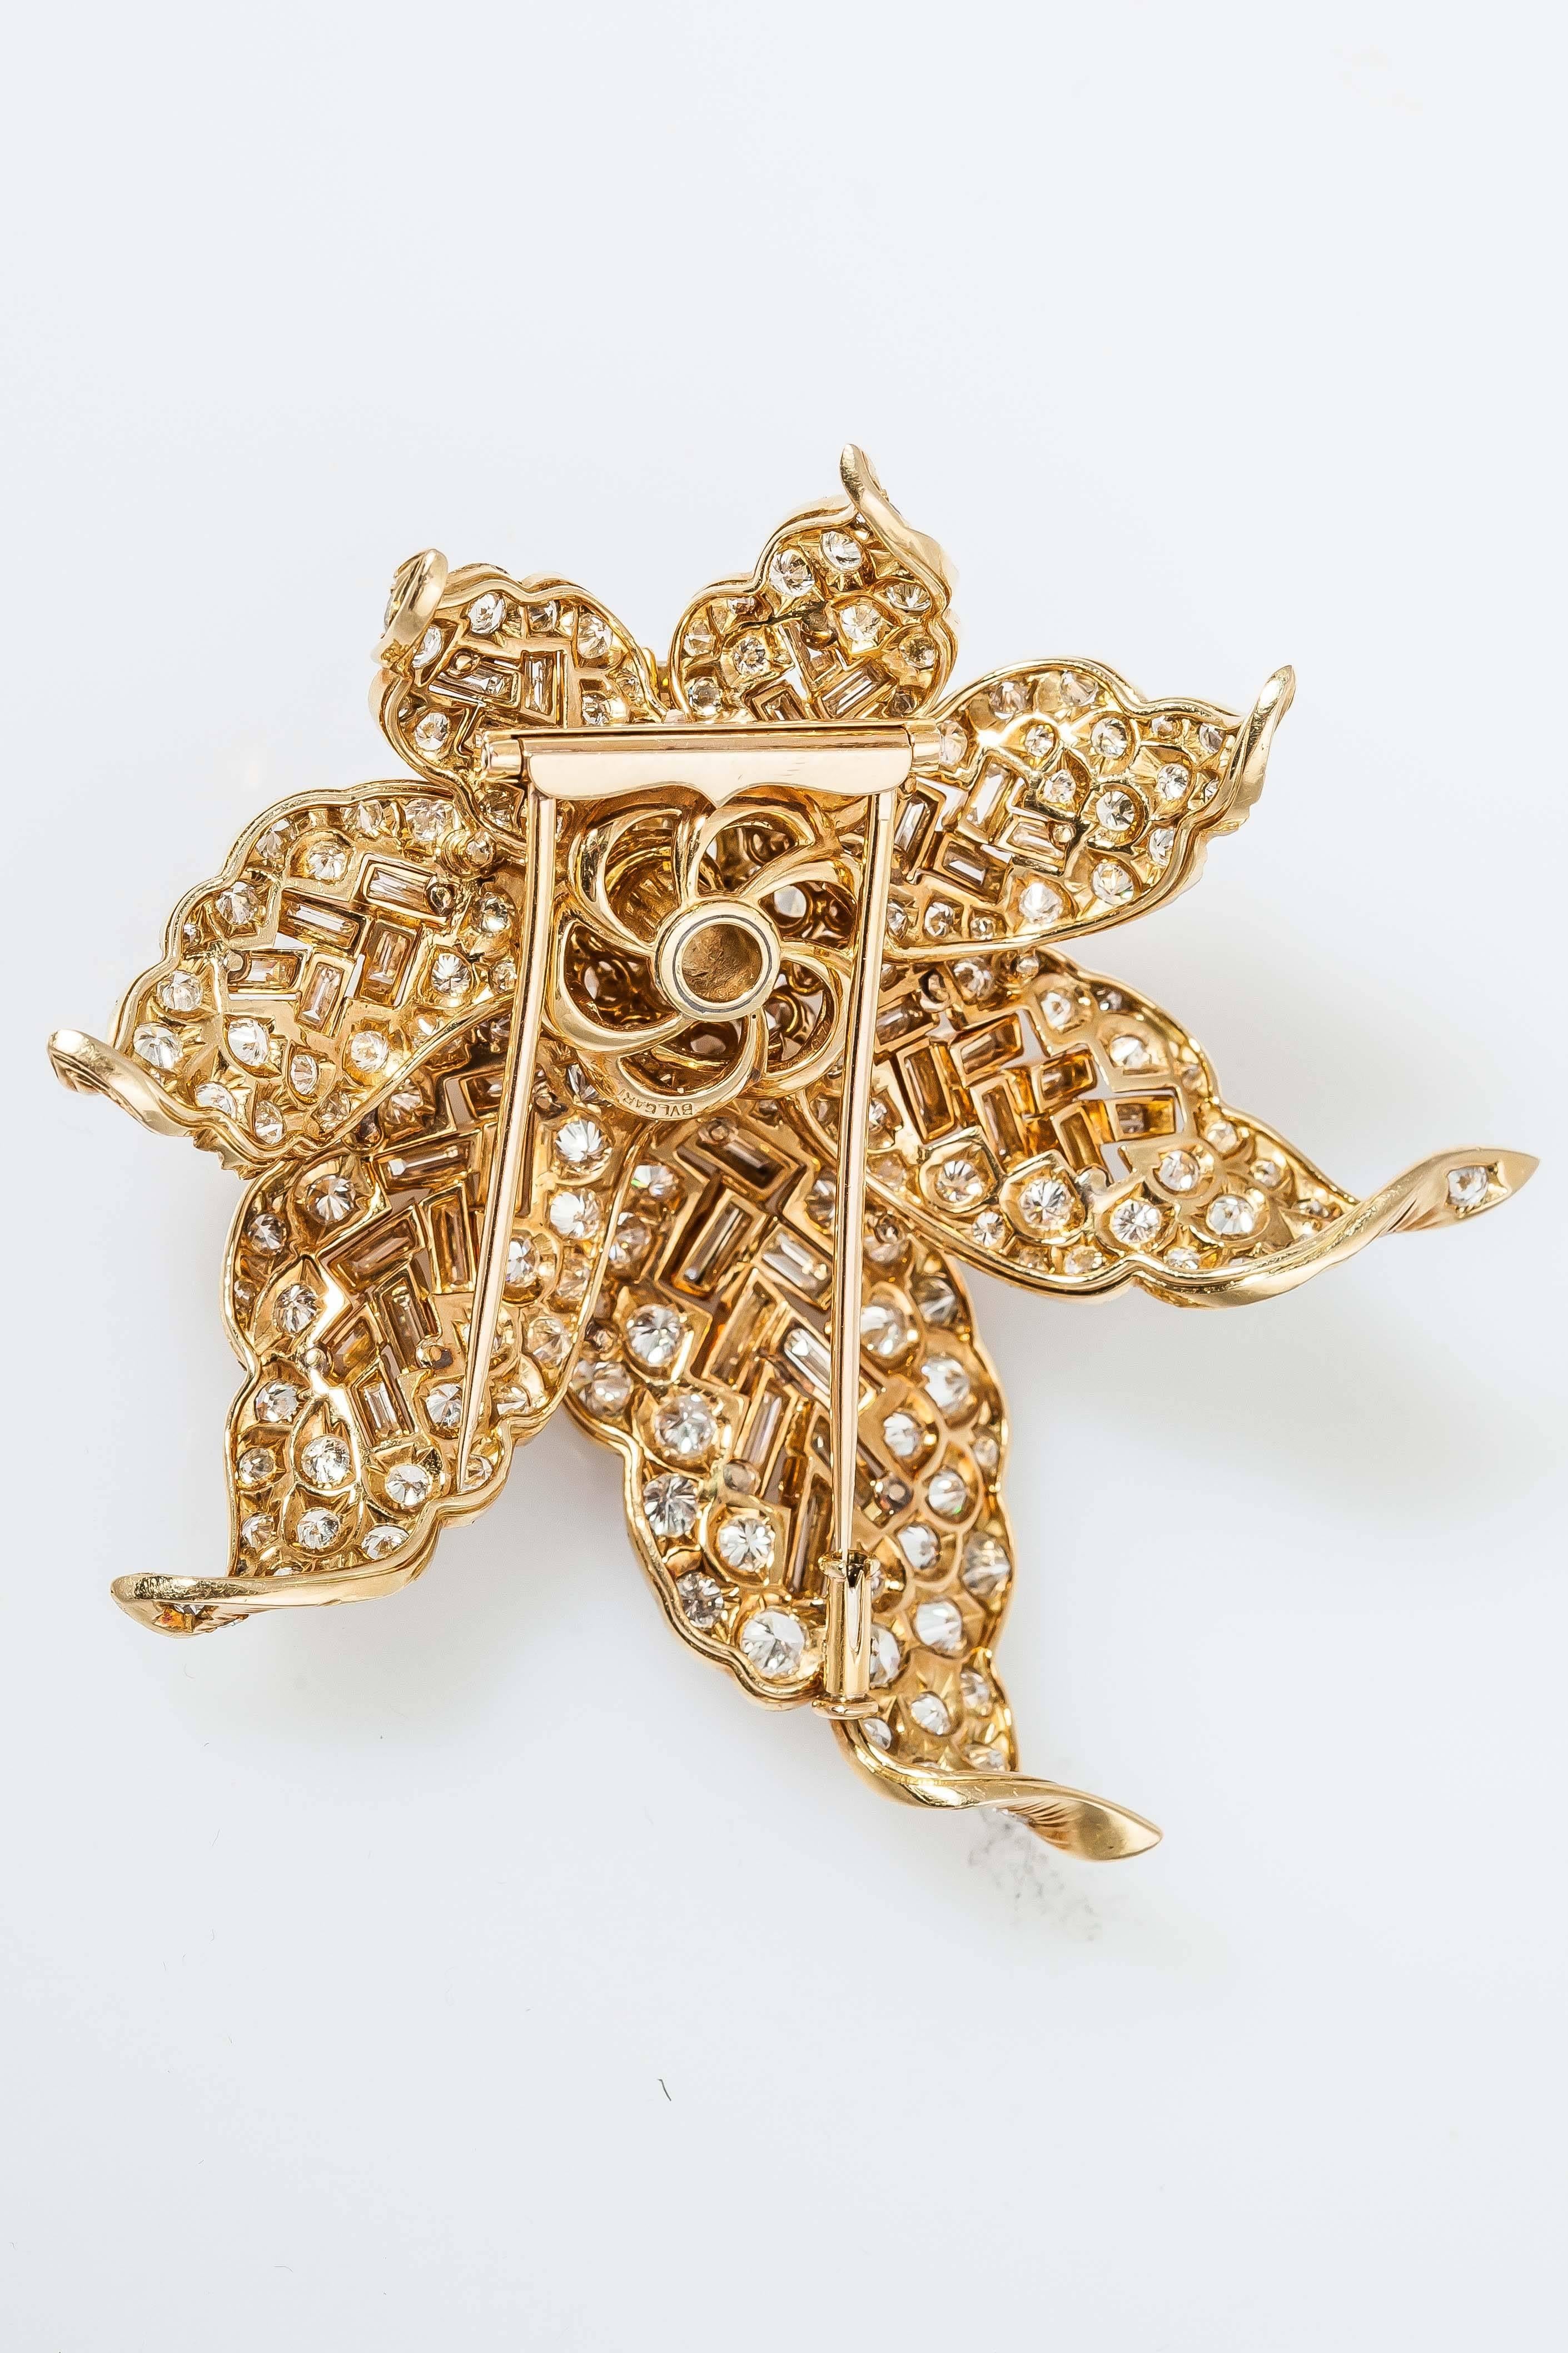 Stunning diamond brooch finely crafted in 18k yellow gold with a mix of diamonds cut weighing 22.00 carats and the center stone 7.00 carats.
